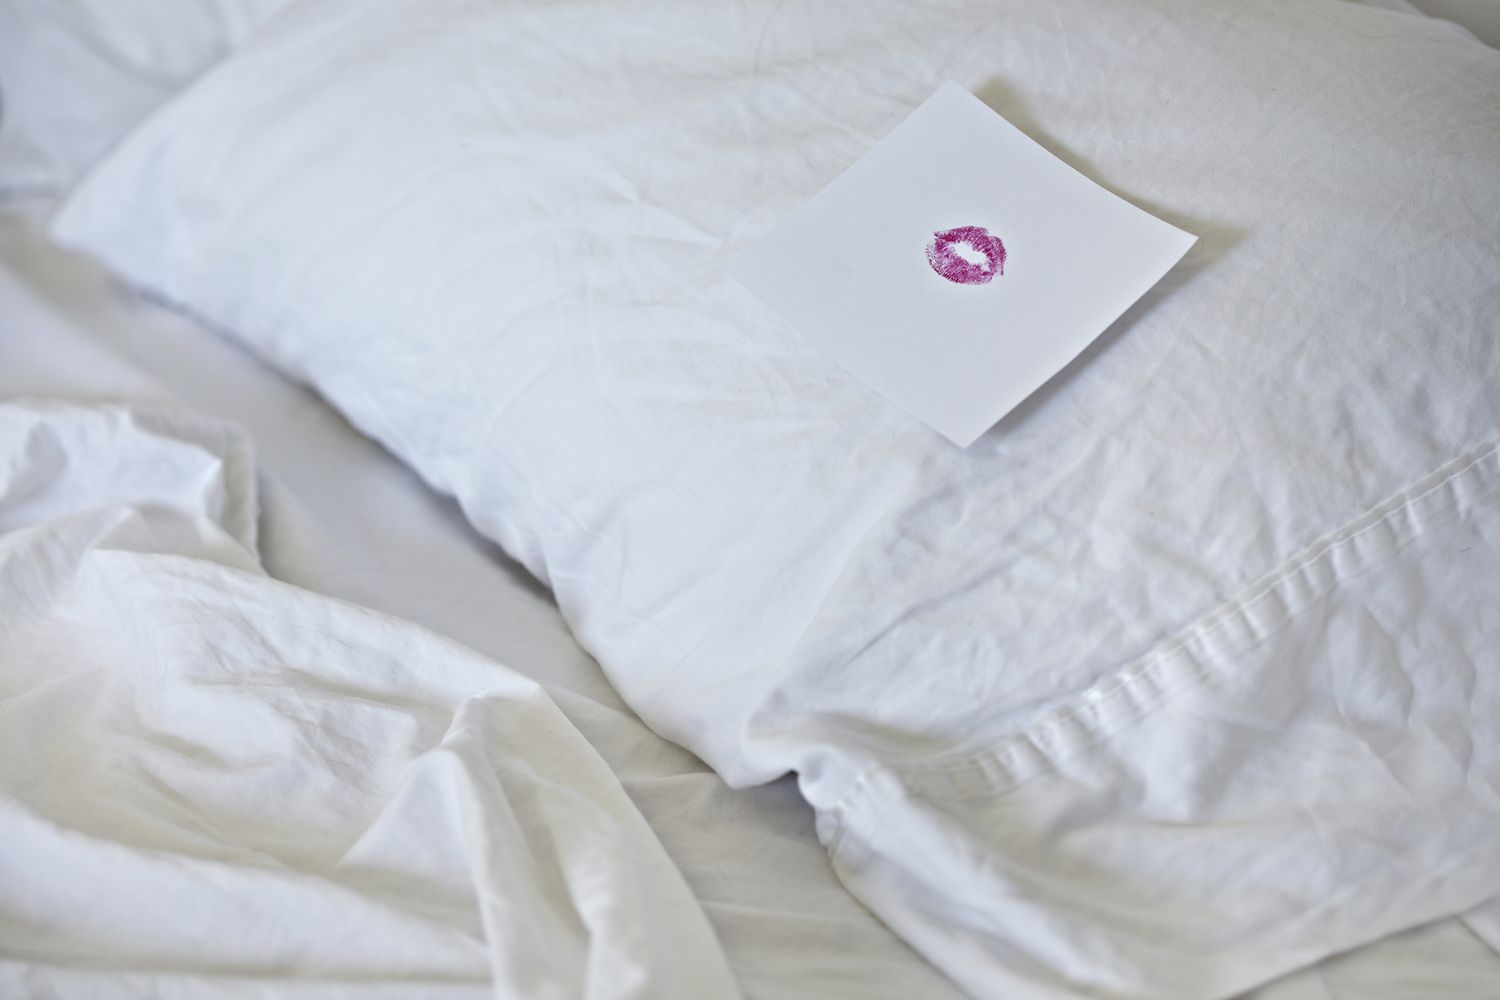 Pillow with kissy love note